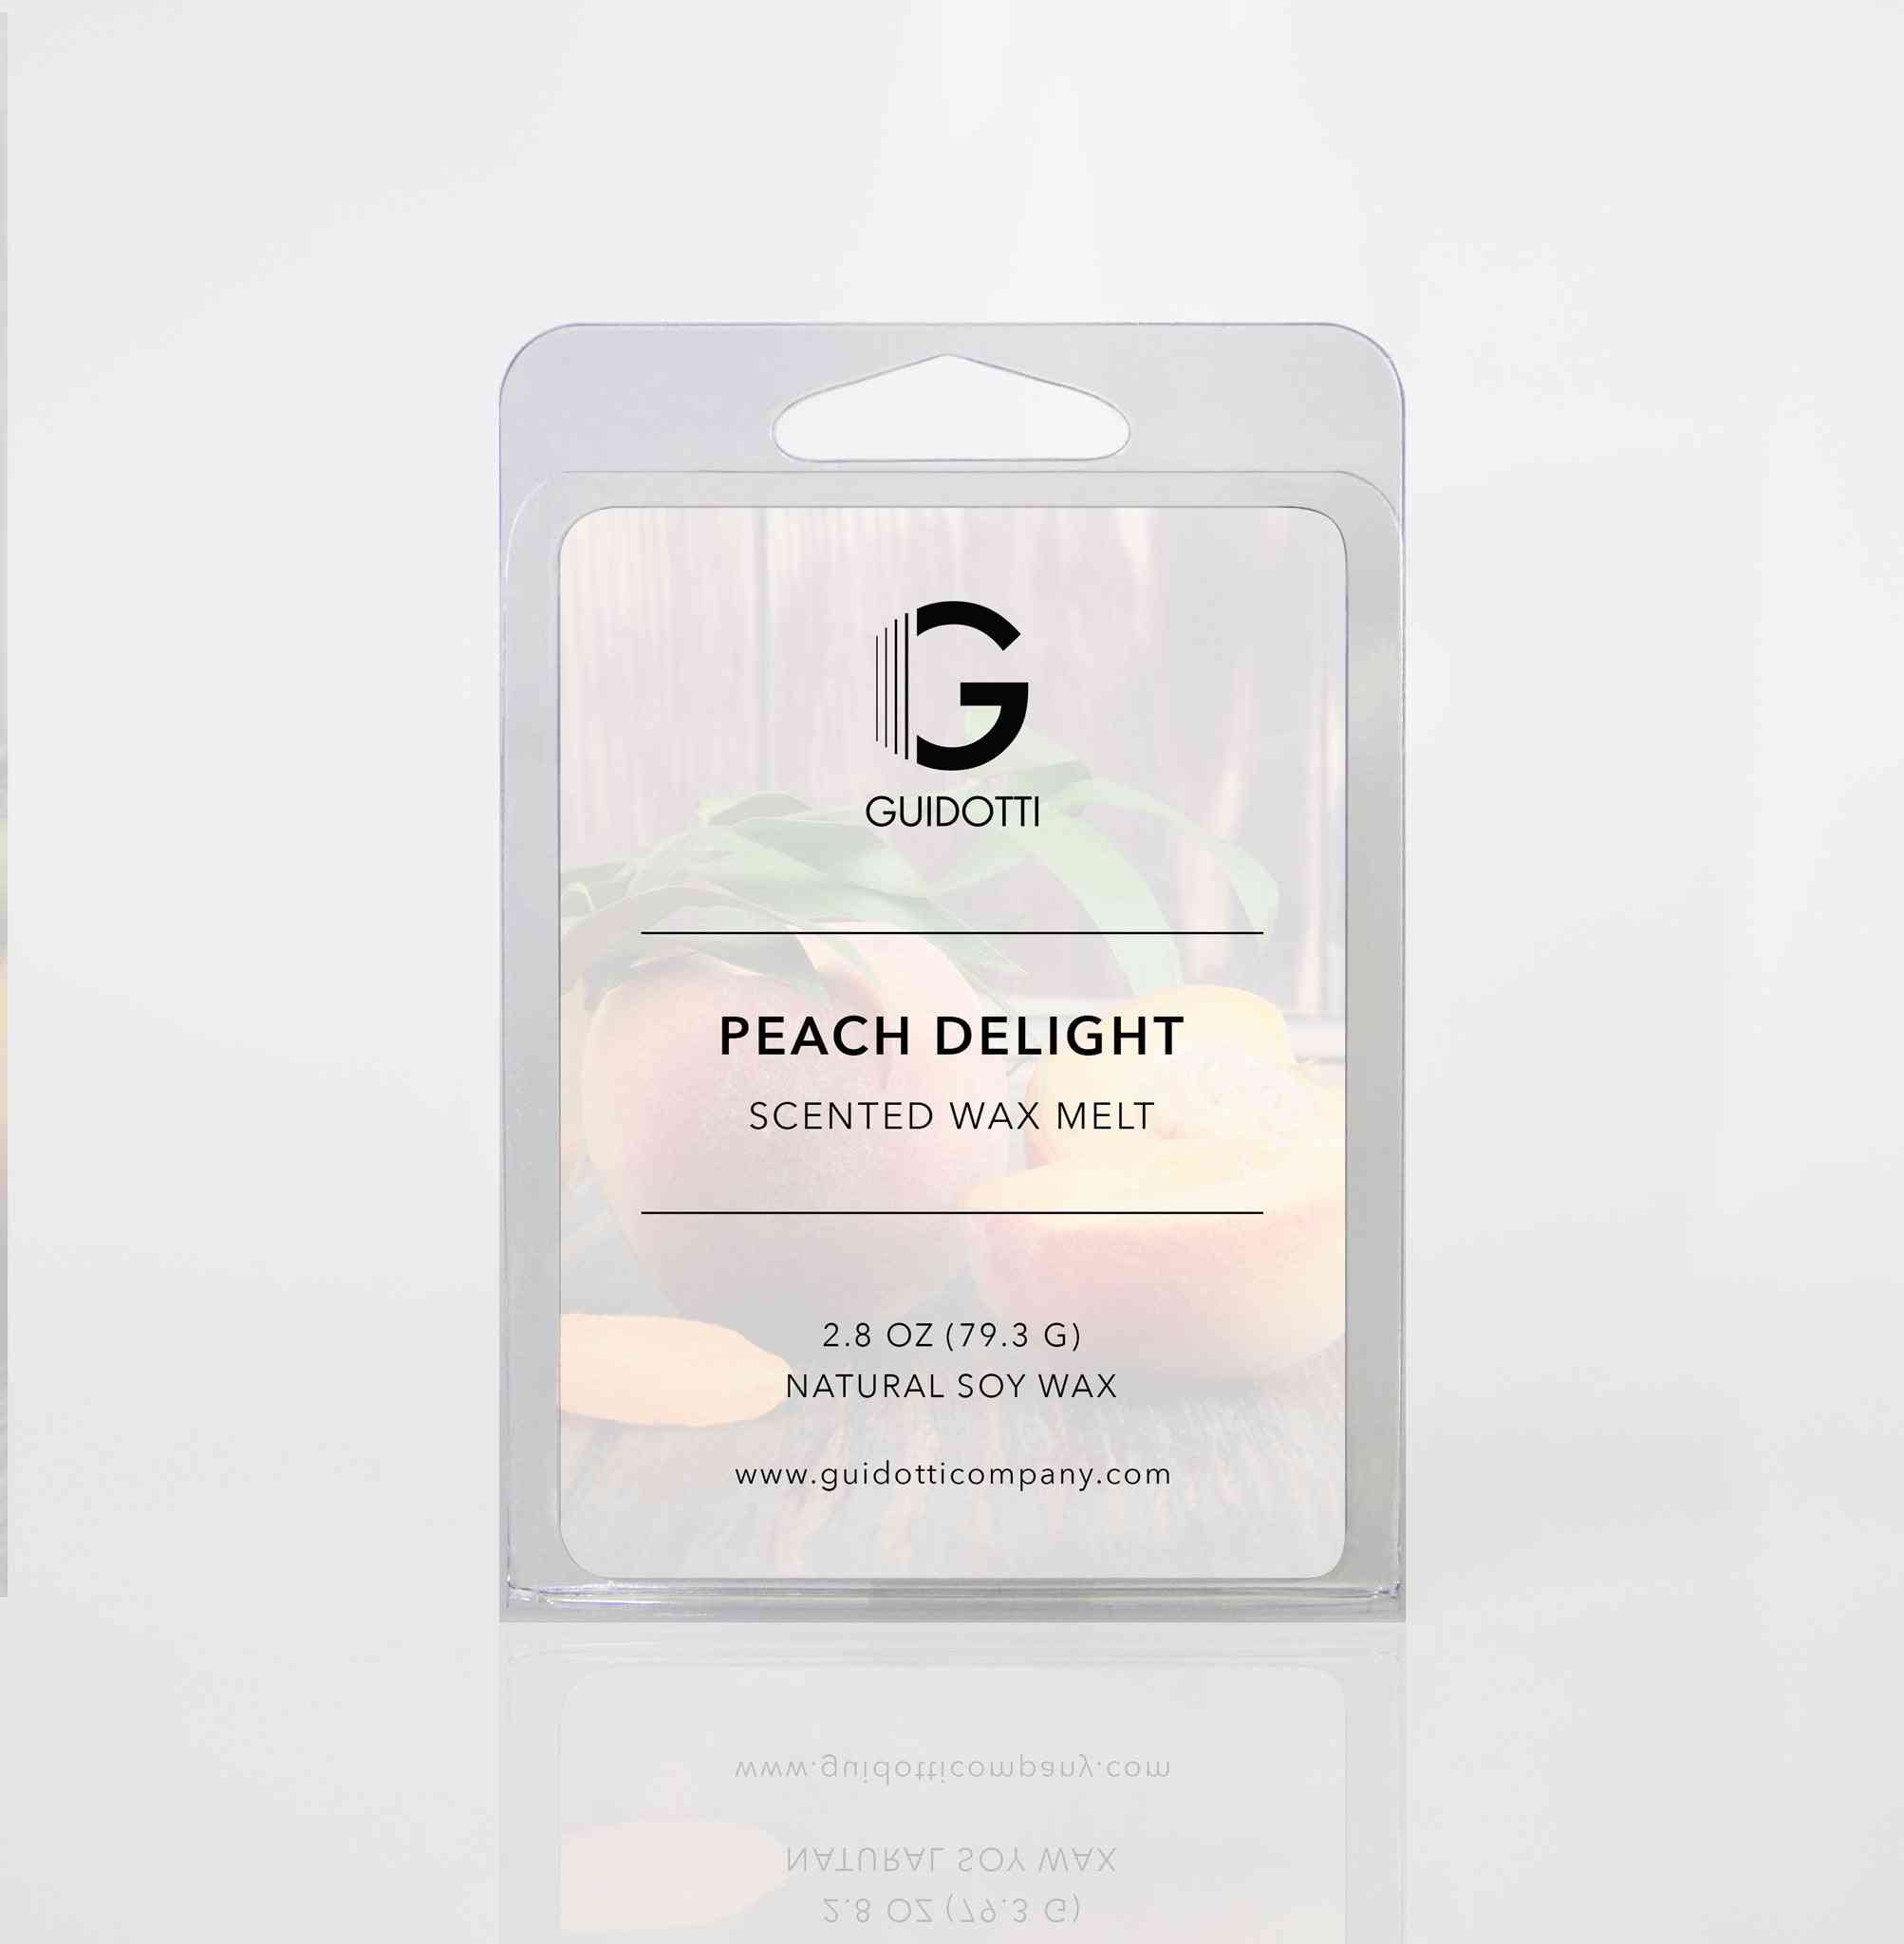 Peach Delight Scented Wax Melt